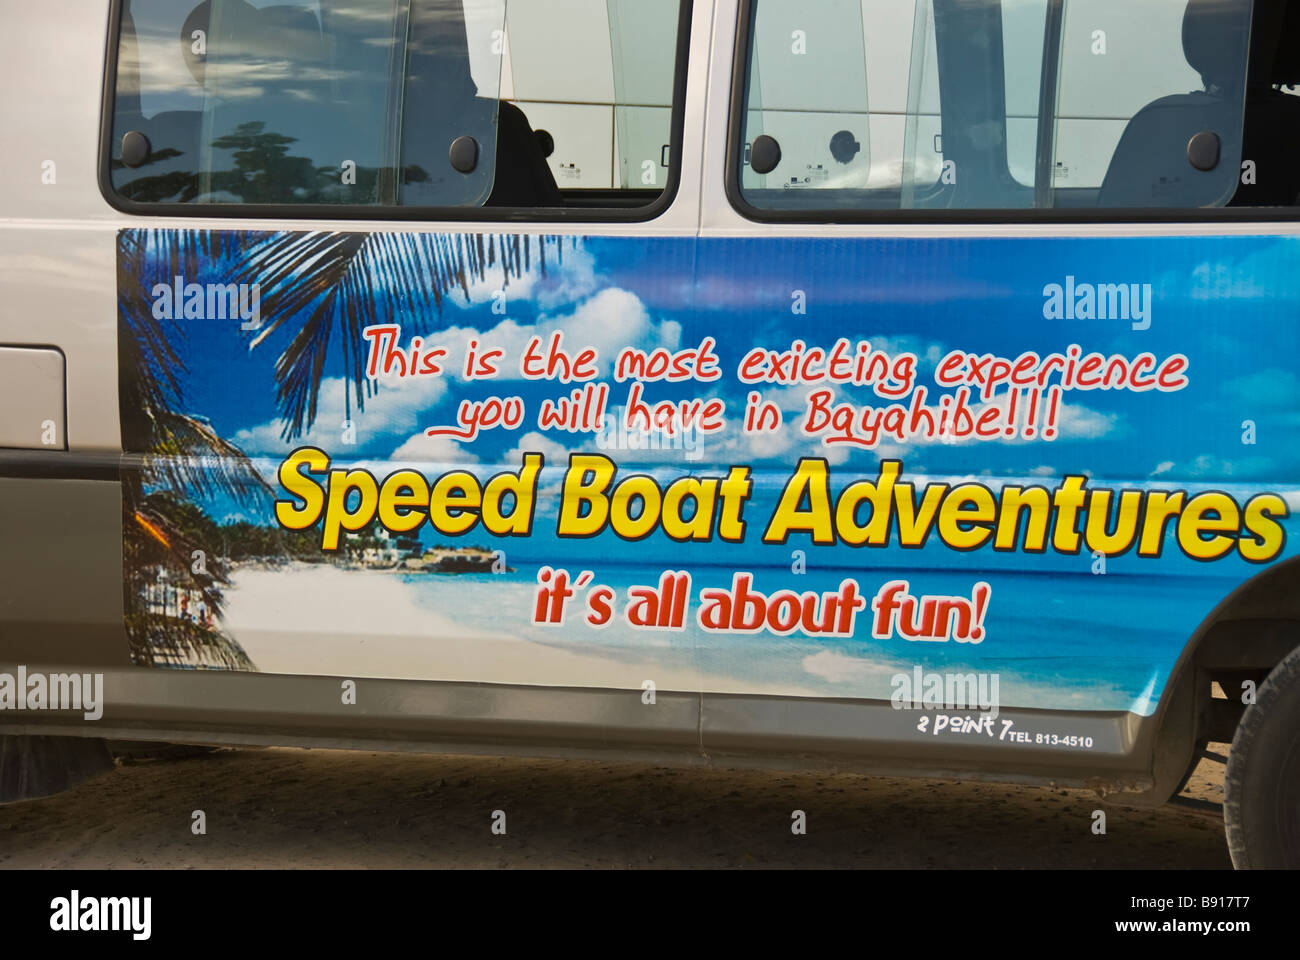 Speed boat adventures sign painted on side of bus  Bayahibe fishing village Dominican Republic tourist destination Stock Photo